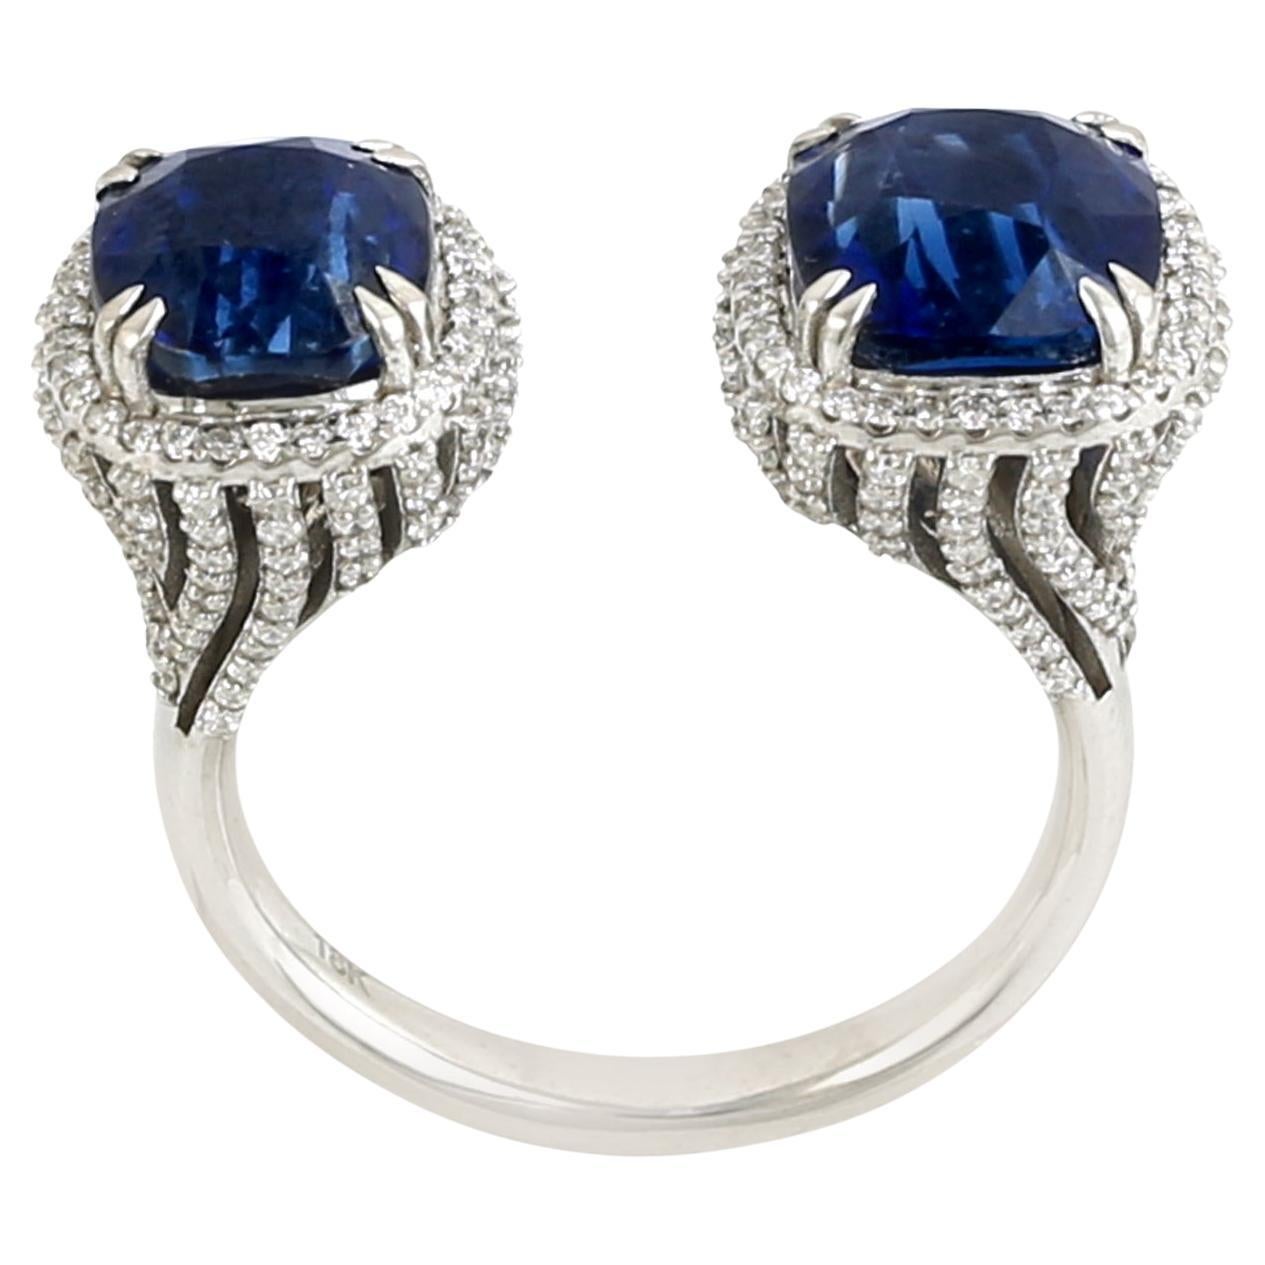 Blue Sapphire Twin Ring With Diamonds Made In 18k White Gold For Sale